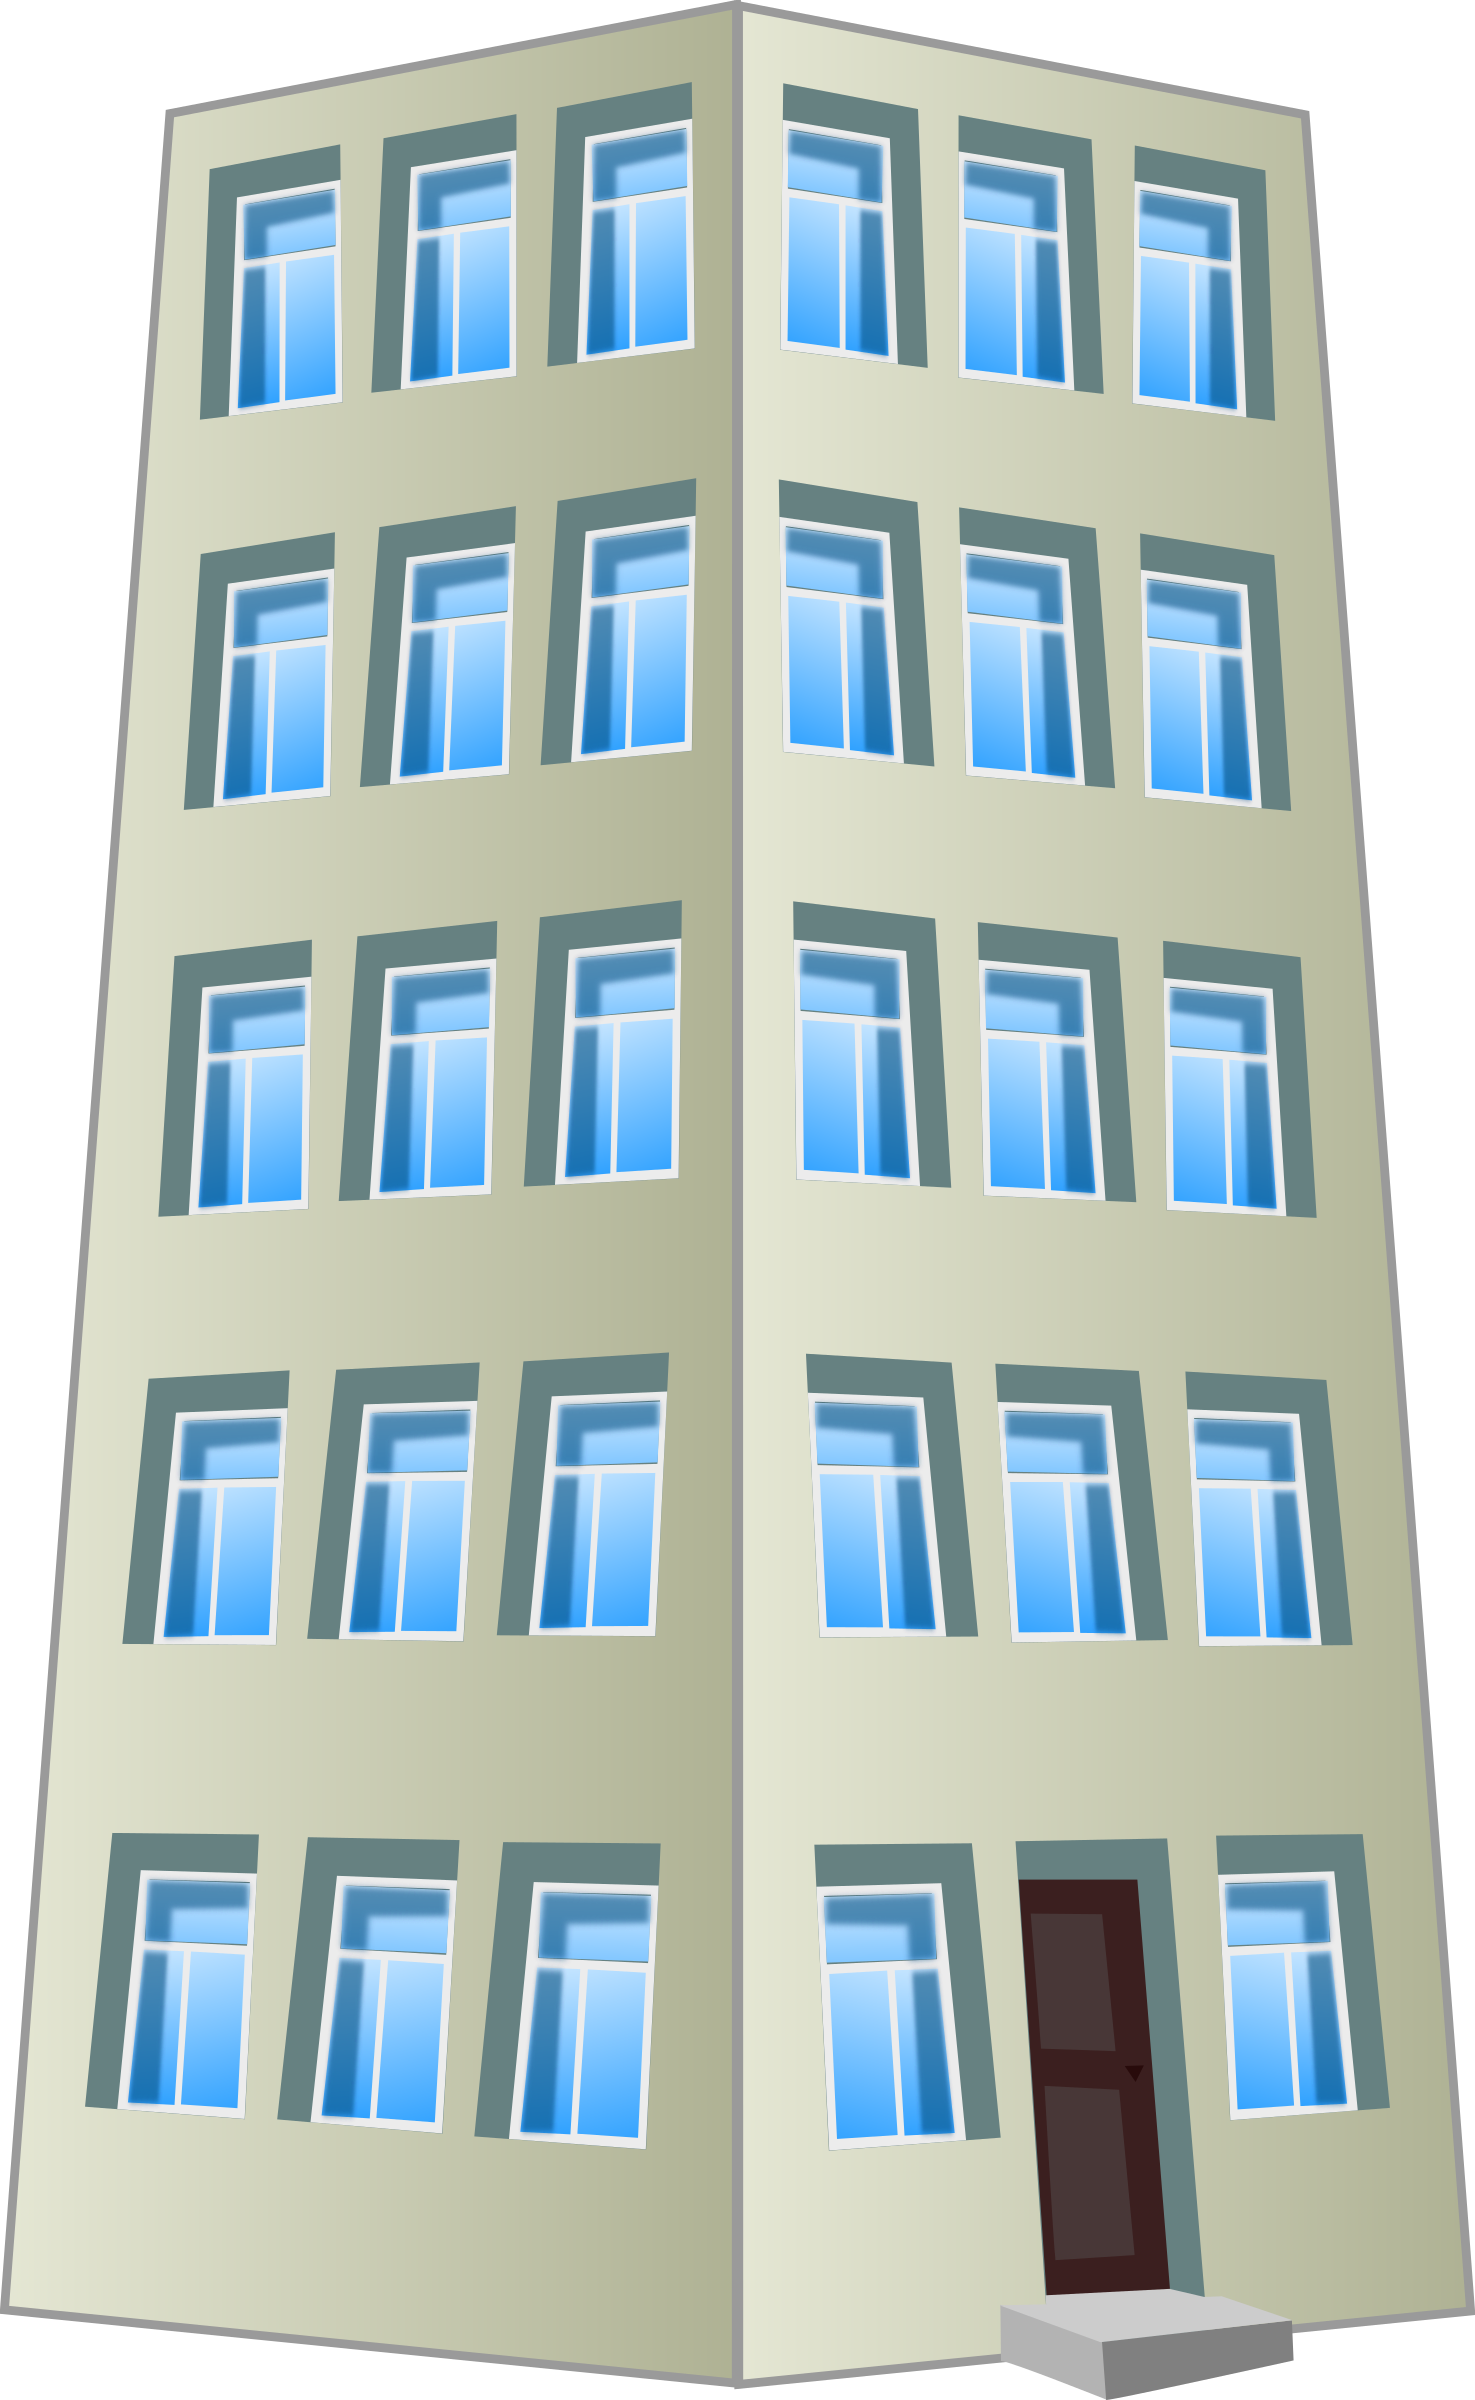 Apartment clipart animated. Build big image png